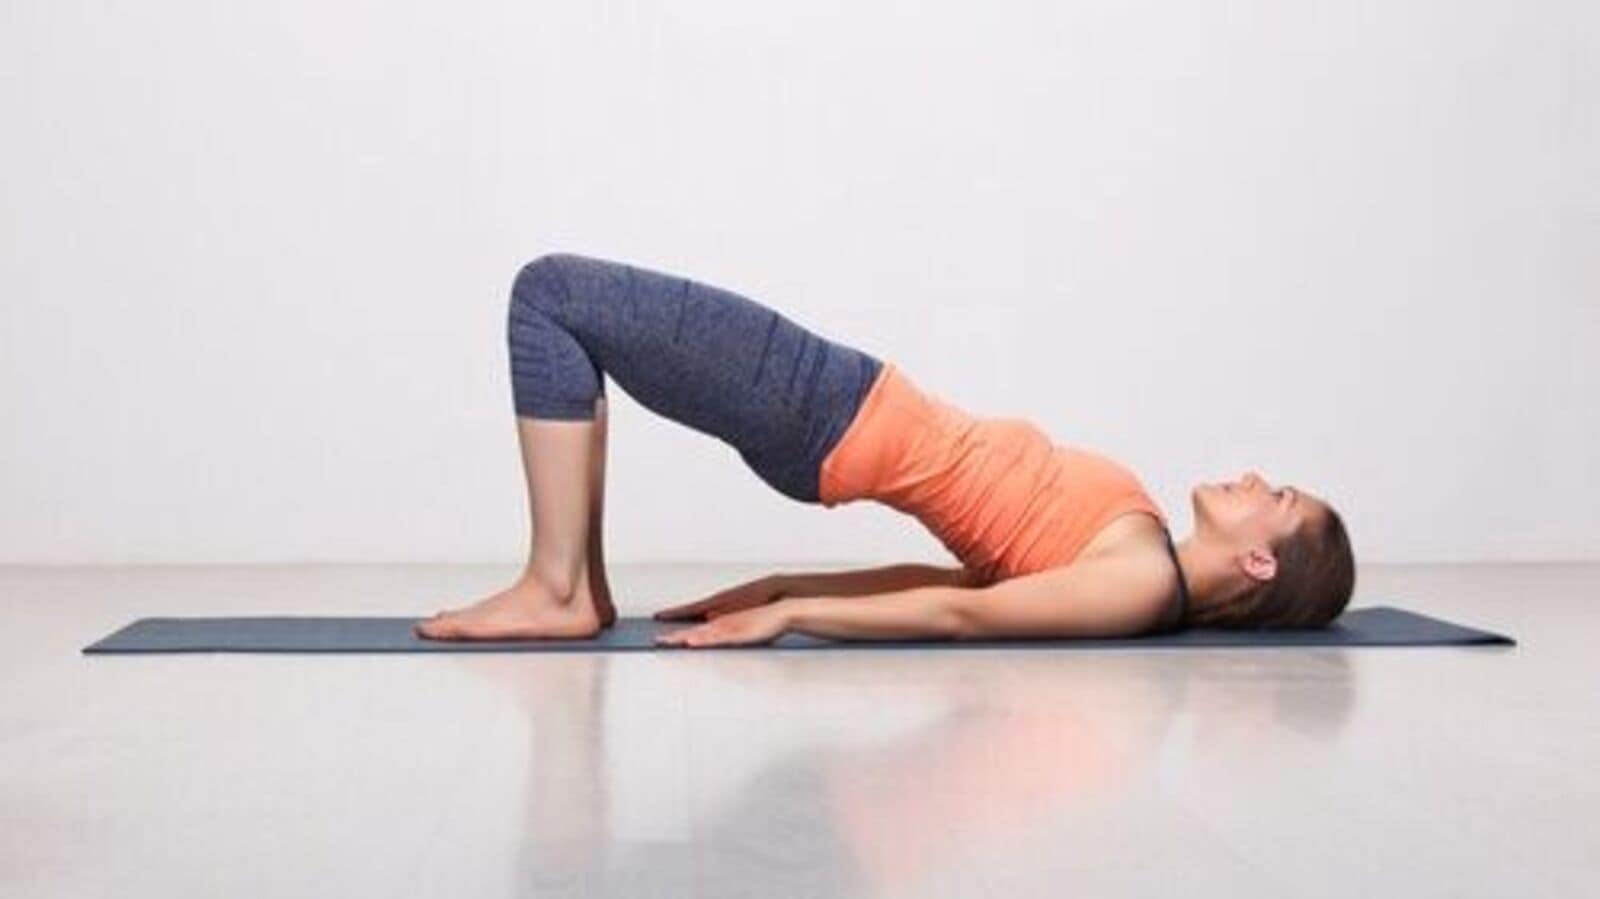 Yoga for Knee Pain: Best Exercises for Knee Pain and Poses to Modify